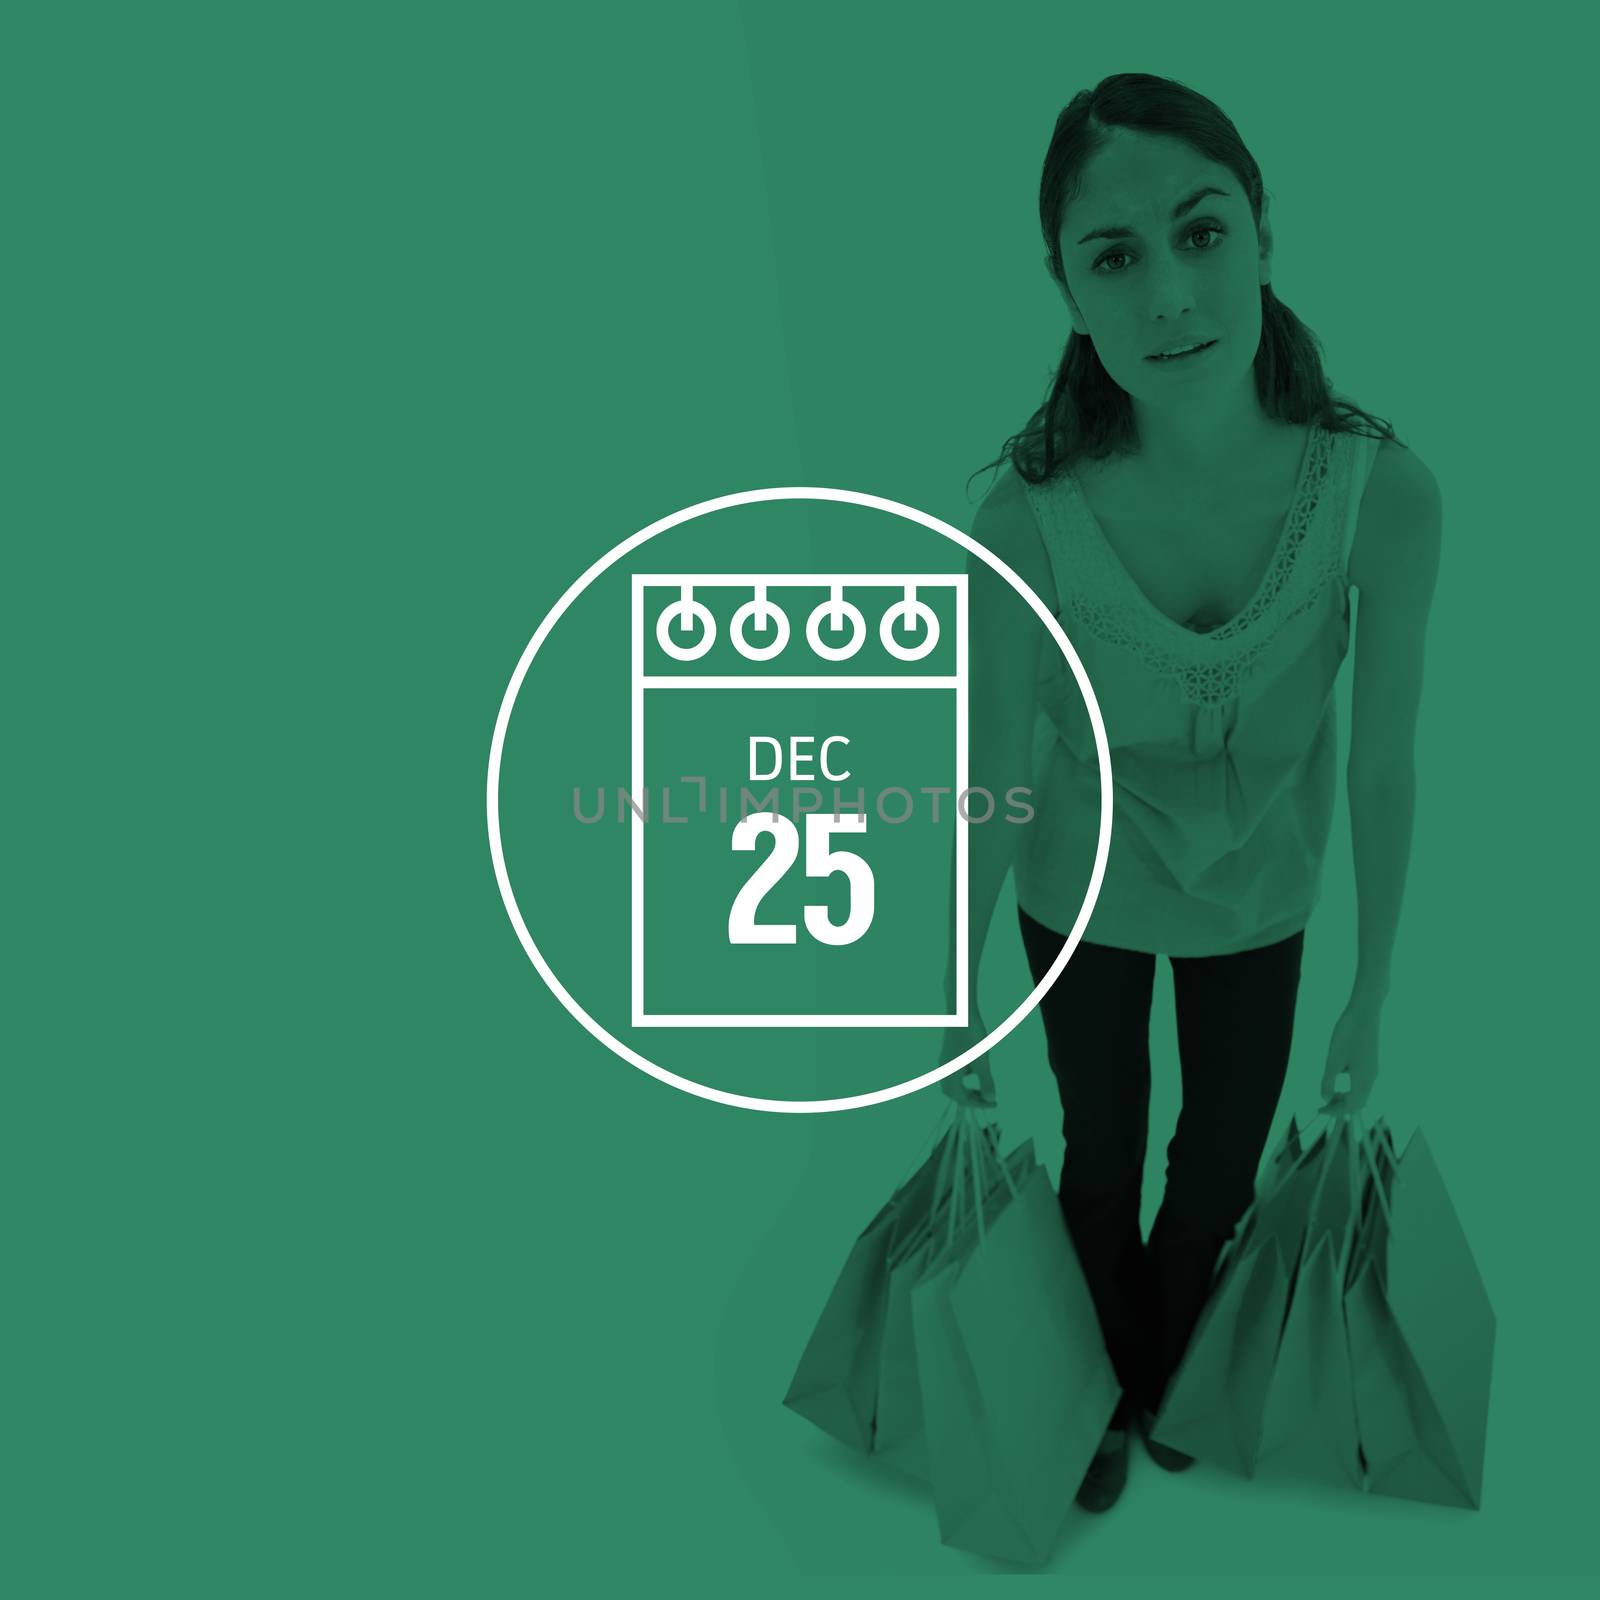 Portrait of a tired woman posing with shopping bags against calendar